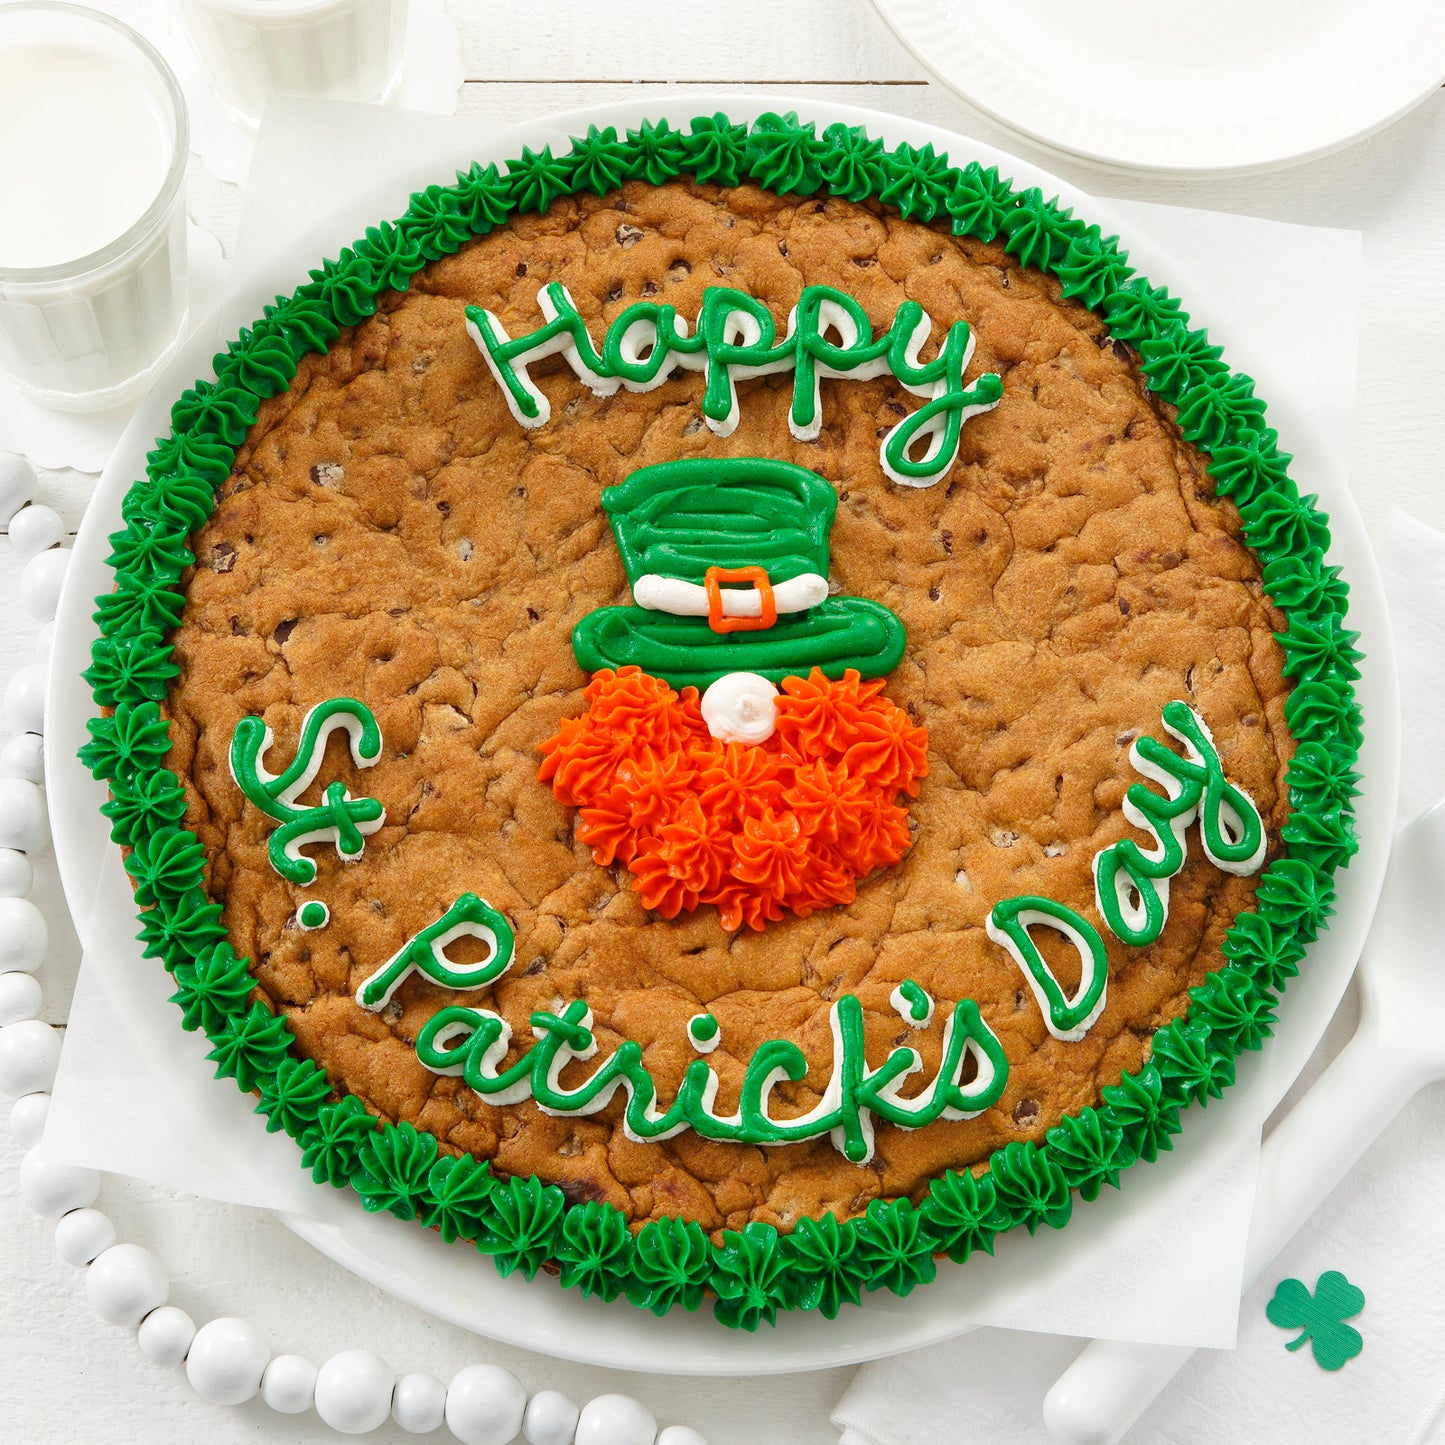 A Happy St. Patrick's Day cookie cake decorated with a frosted leprechaun face